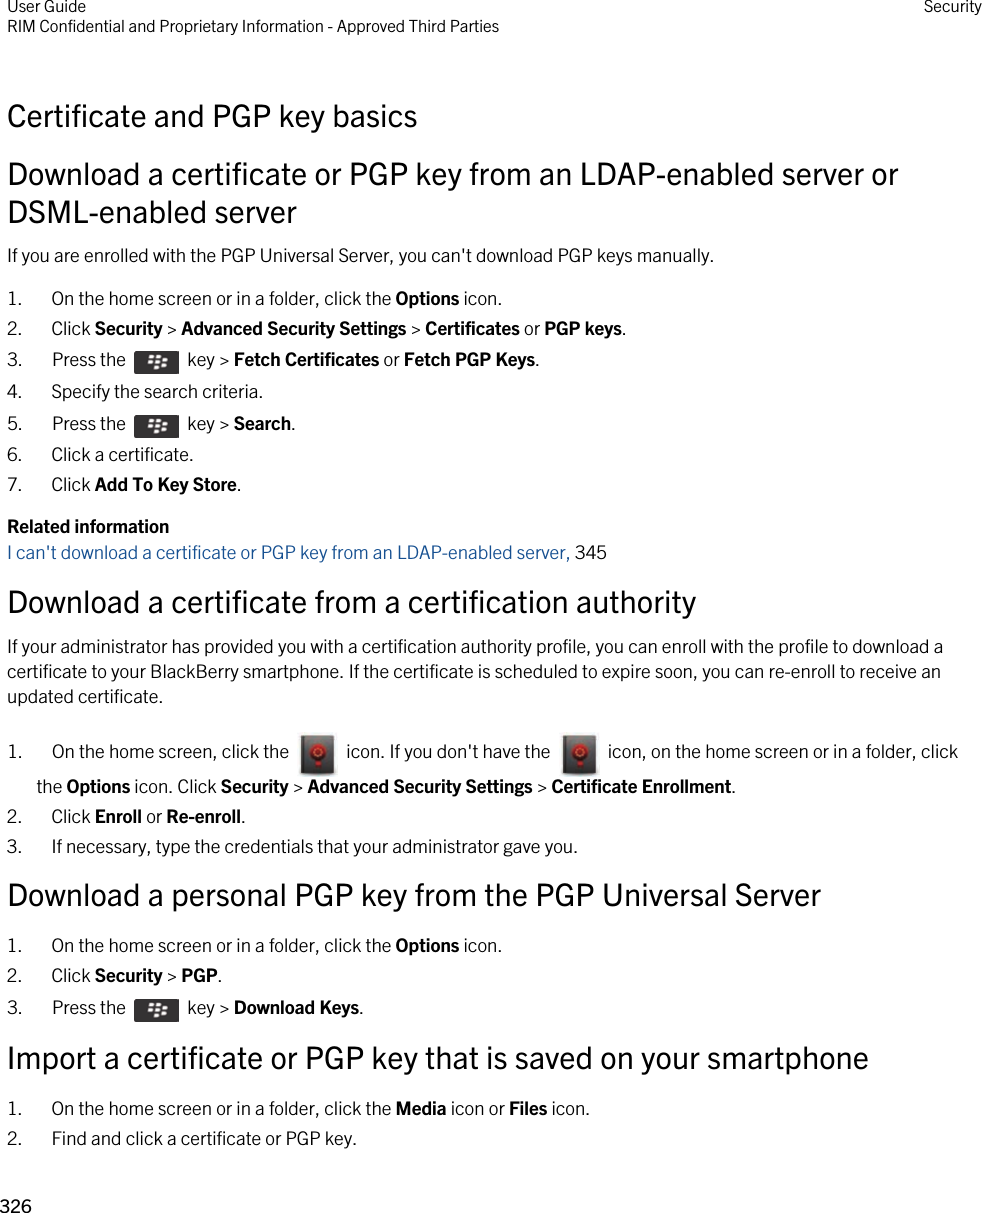 Certificate and PGP key basicsDownload a certificate or PGP key from an LDAP-enabled server or DSML-enabled serverIf you are enrolled with the PGP Universal Server, you can&apos;t download PGP keys manually.1. On the home screen or in a folder, click the Options icon.2. Click Security &gt; Advanced Security Settings &gt; Certificates or PGP keys.3.  Press the    key &gt; Fetch Certificates or Fetch PGP Keys. 4. Specify the search criteria.5.  Press the    key &gt; Search. 6. Click a certificate.7. Click Add To Key Store.Related informationI can&apos;t download a certificate or PGP key from an LDAP-enabled server, 345Download a certificate from a certification authorityIf your administrator has provided you with a certification authority profile, you can enroll with the profile to download a certificate to your BlackBerry smartphone. If the certificate is scheduled to expire soon, you can re-enroll to receive an updated certificate.1.  On the home screen, click the    icon. If you don&apos;t have the    icon, on the home screen or in a folder, click the Options icon. Click Security &gt; Advanced Security Settings &gt; Certificate Enrollment. 2. Click Enroll or Re-enroll.3. If necessary, type the credentials that your administrator gave you.Download a personal PGP key from the PGP Universal Server1. On the home screen or in a folder, click the Options icon.2. Click Security &gt; PGP.3.  Press the    key &gt; Download Keys. Import a certificate or PGP key that is saved on your smartphone1. On the home screen or in a folder, click the Media icon or Files icon.2. Find and click a certificate or PGP key.User GuideRIM Confidential and Proprietary Information - Approved Third Parties Security326 